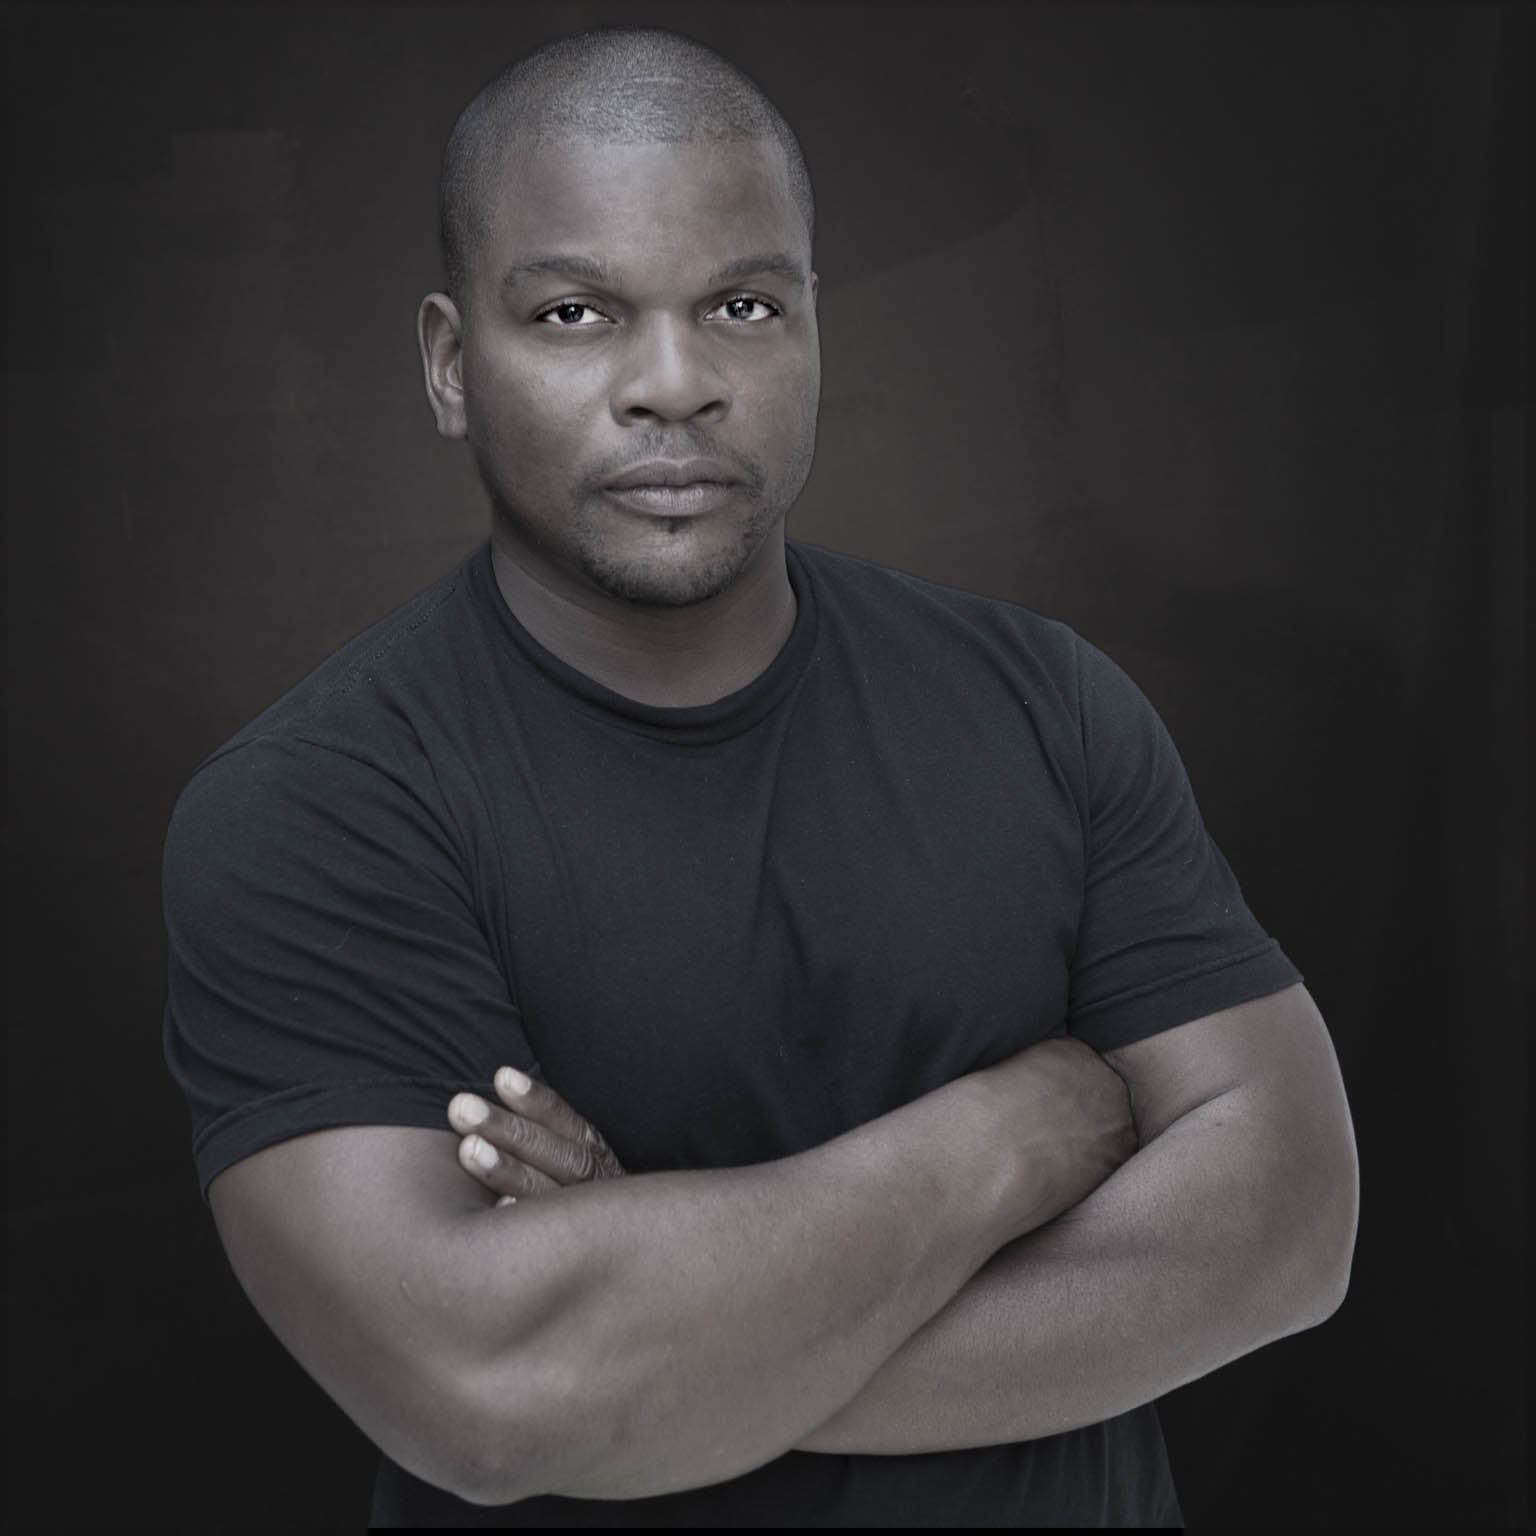 Portrait of Kehinde Wiley by the Dakar based photographer Antoine Tempé. Kehinde Wiley is a painter known for highly naturalistic portraits of black people in heroic poses.